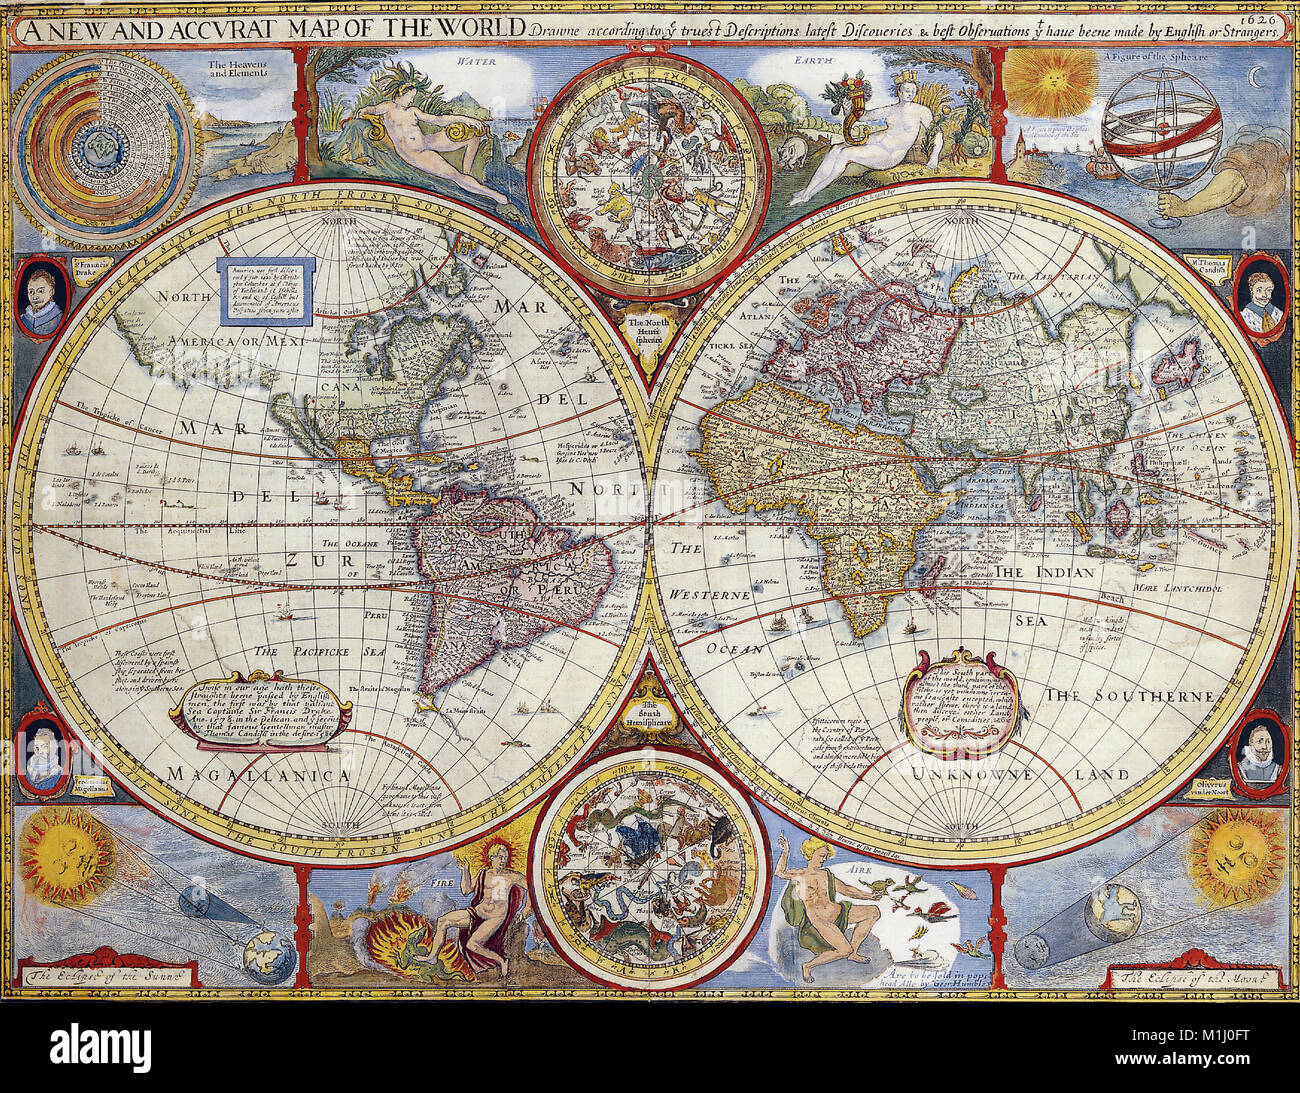 JOHN SPEED (1551/2 - 1629) English cartographer. Word map from a 1627 atlas 'Prospect of the Most Famous Parts of the World' published by George Humble Stock Photo